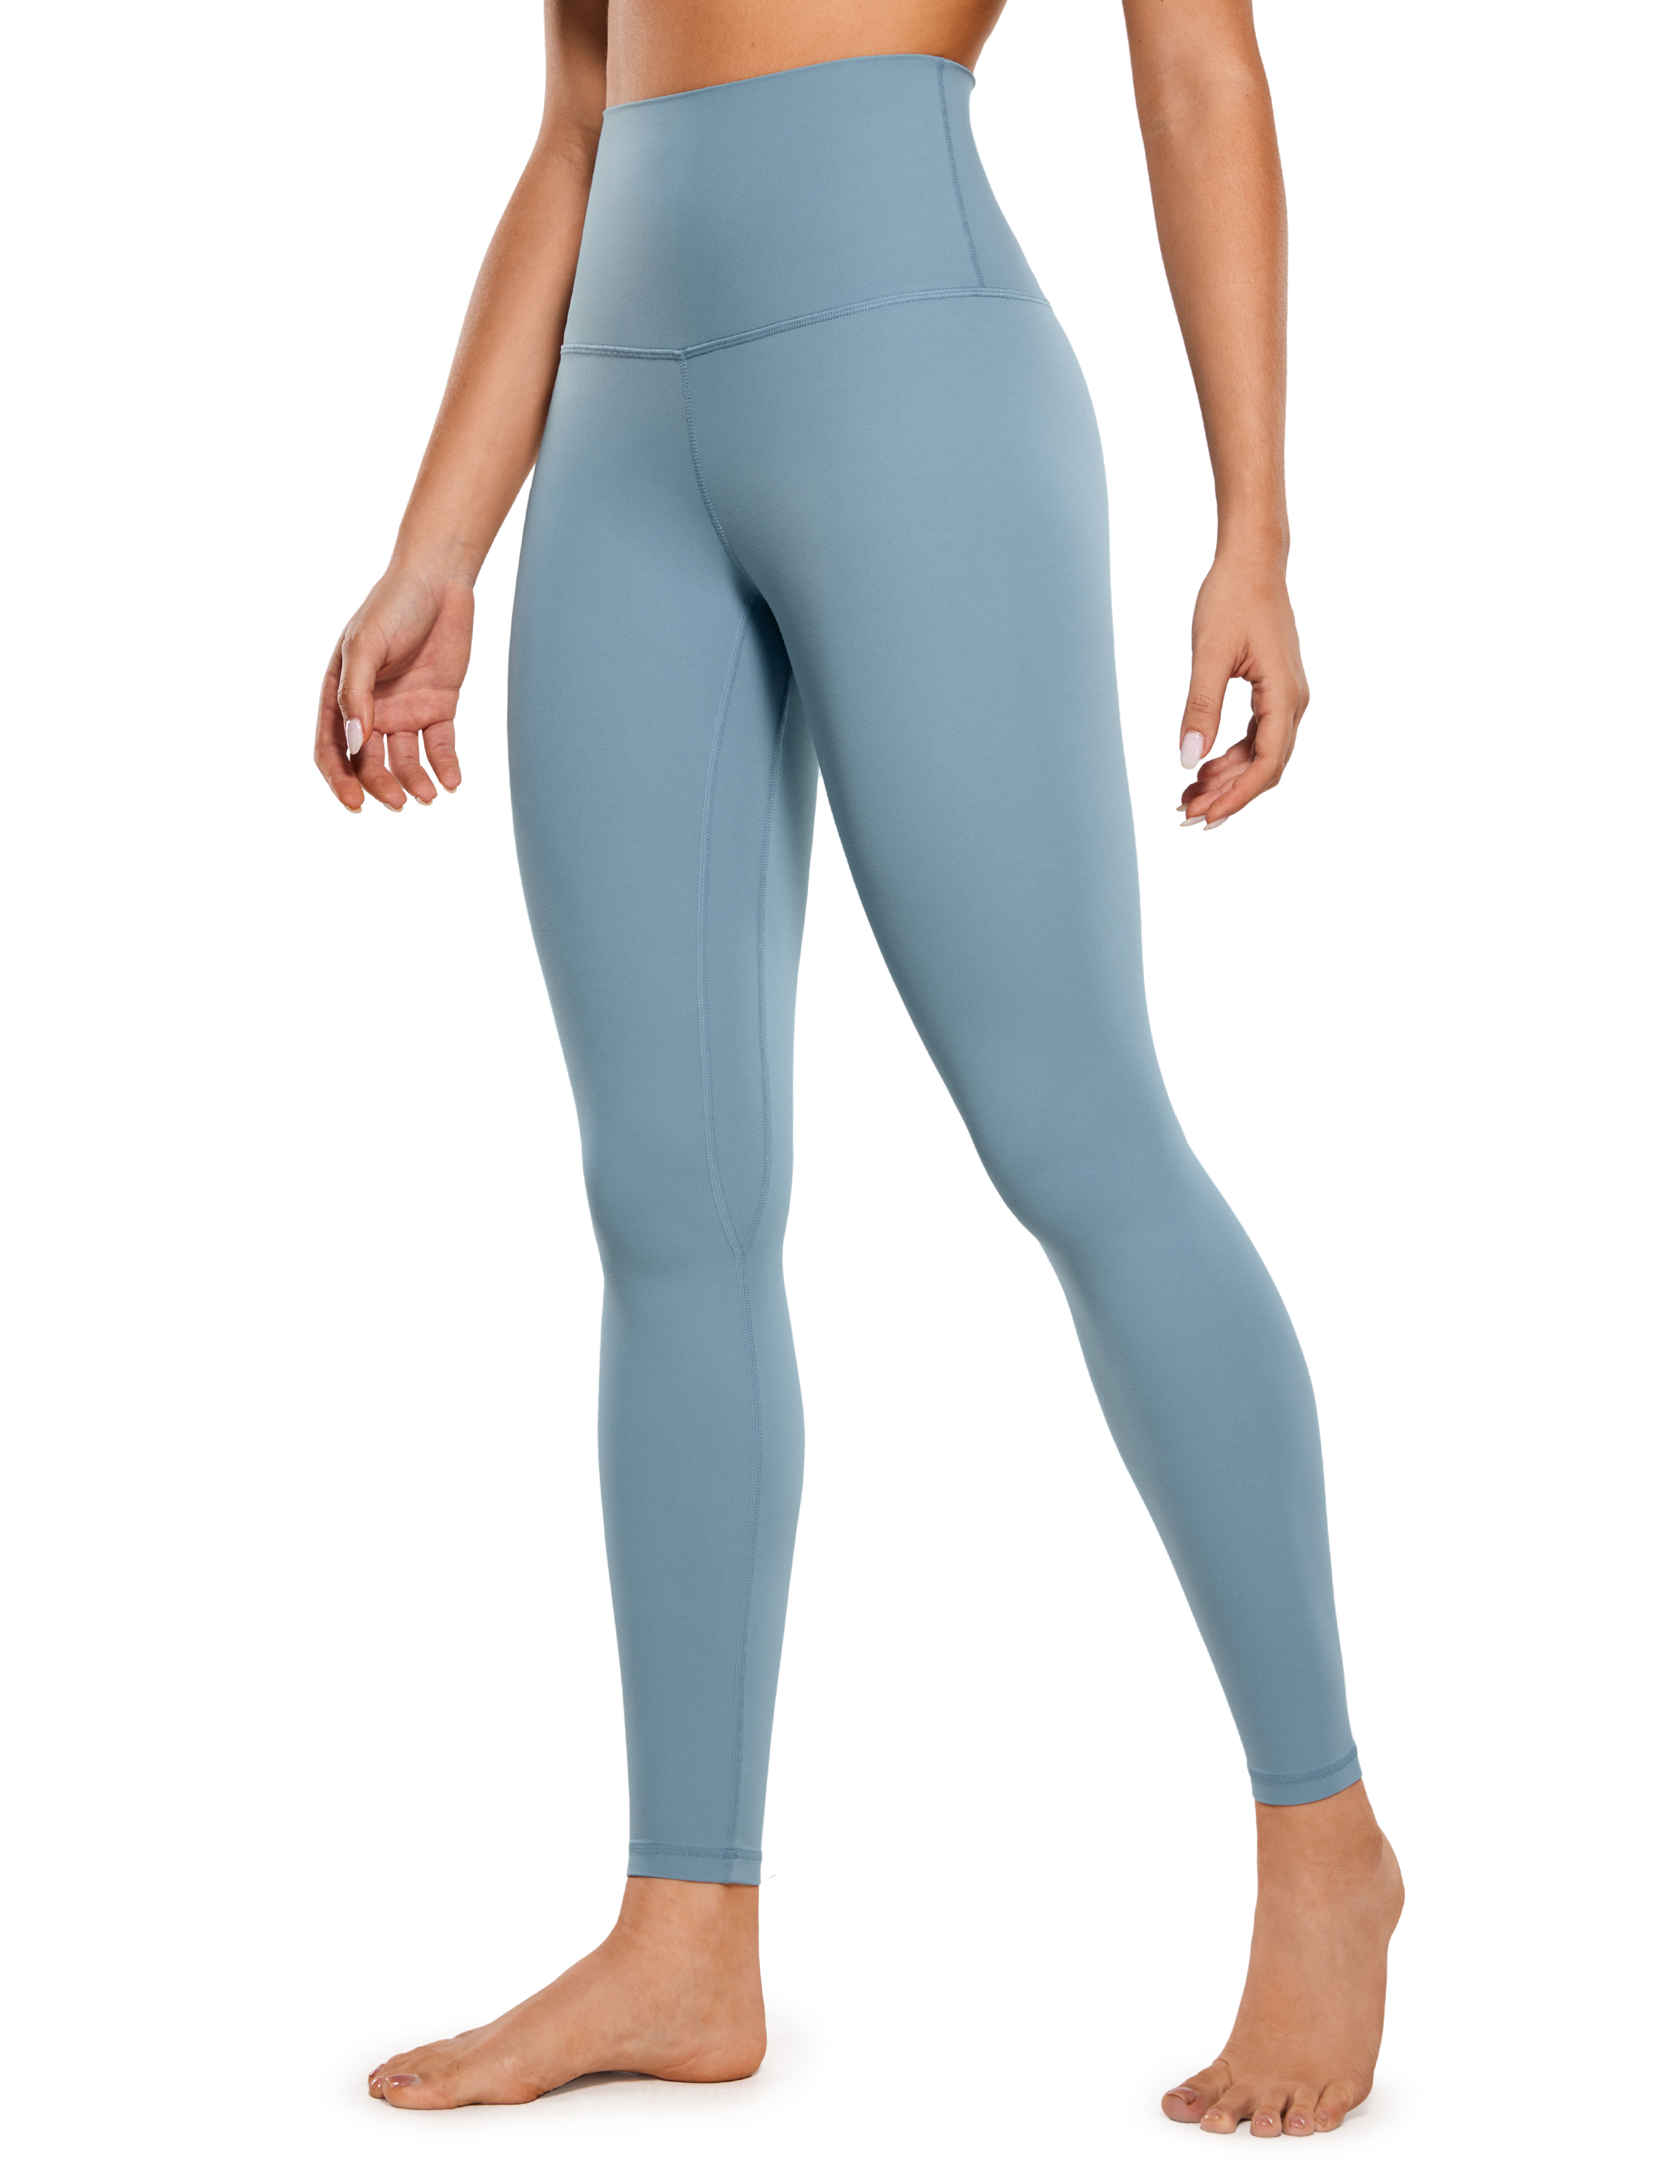 Fierce In Pink High Waisted Leggings - Radiant Blue Provisions